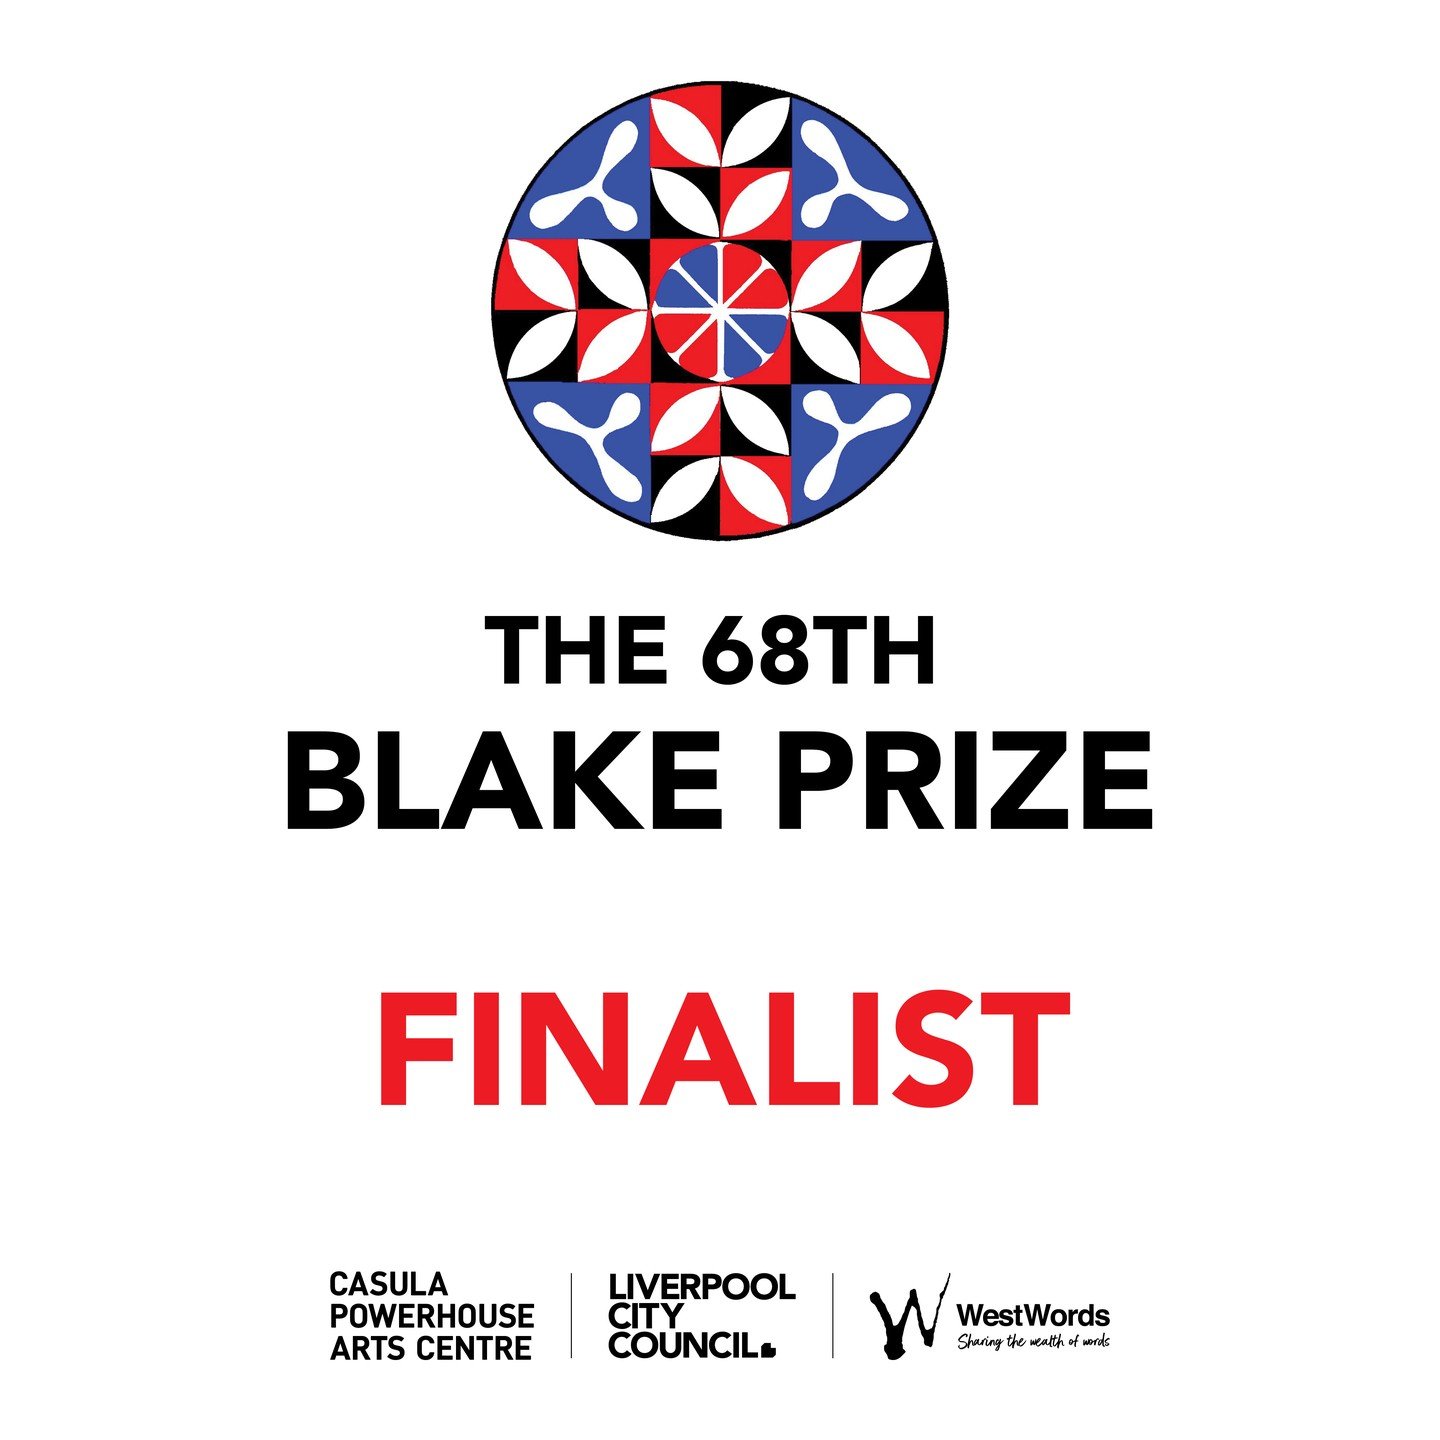 I'm a finalist in the 68th Blake Prize! I entered my video work &quot;Celestial Bodies (Eclipse)&quot; last year and actually forgot about it until I got the email - what a nice surprise. @casulapowerhouse